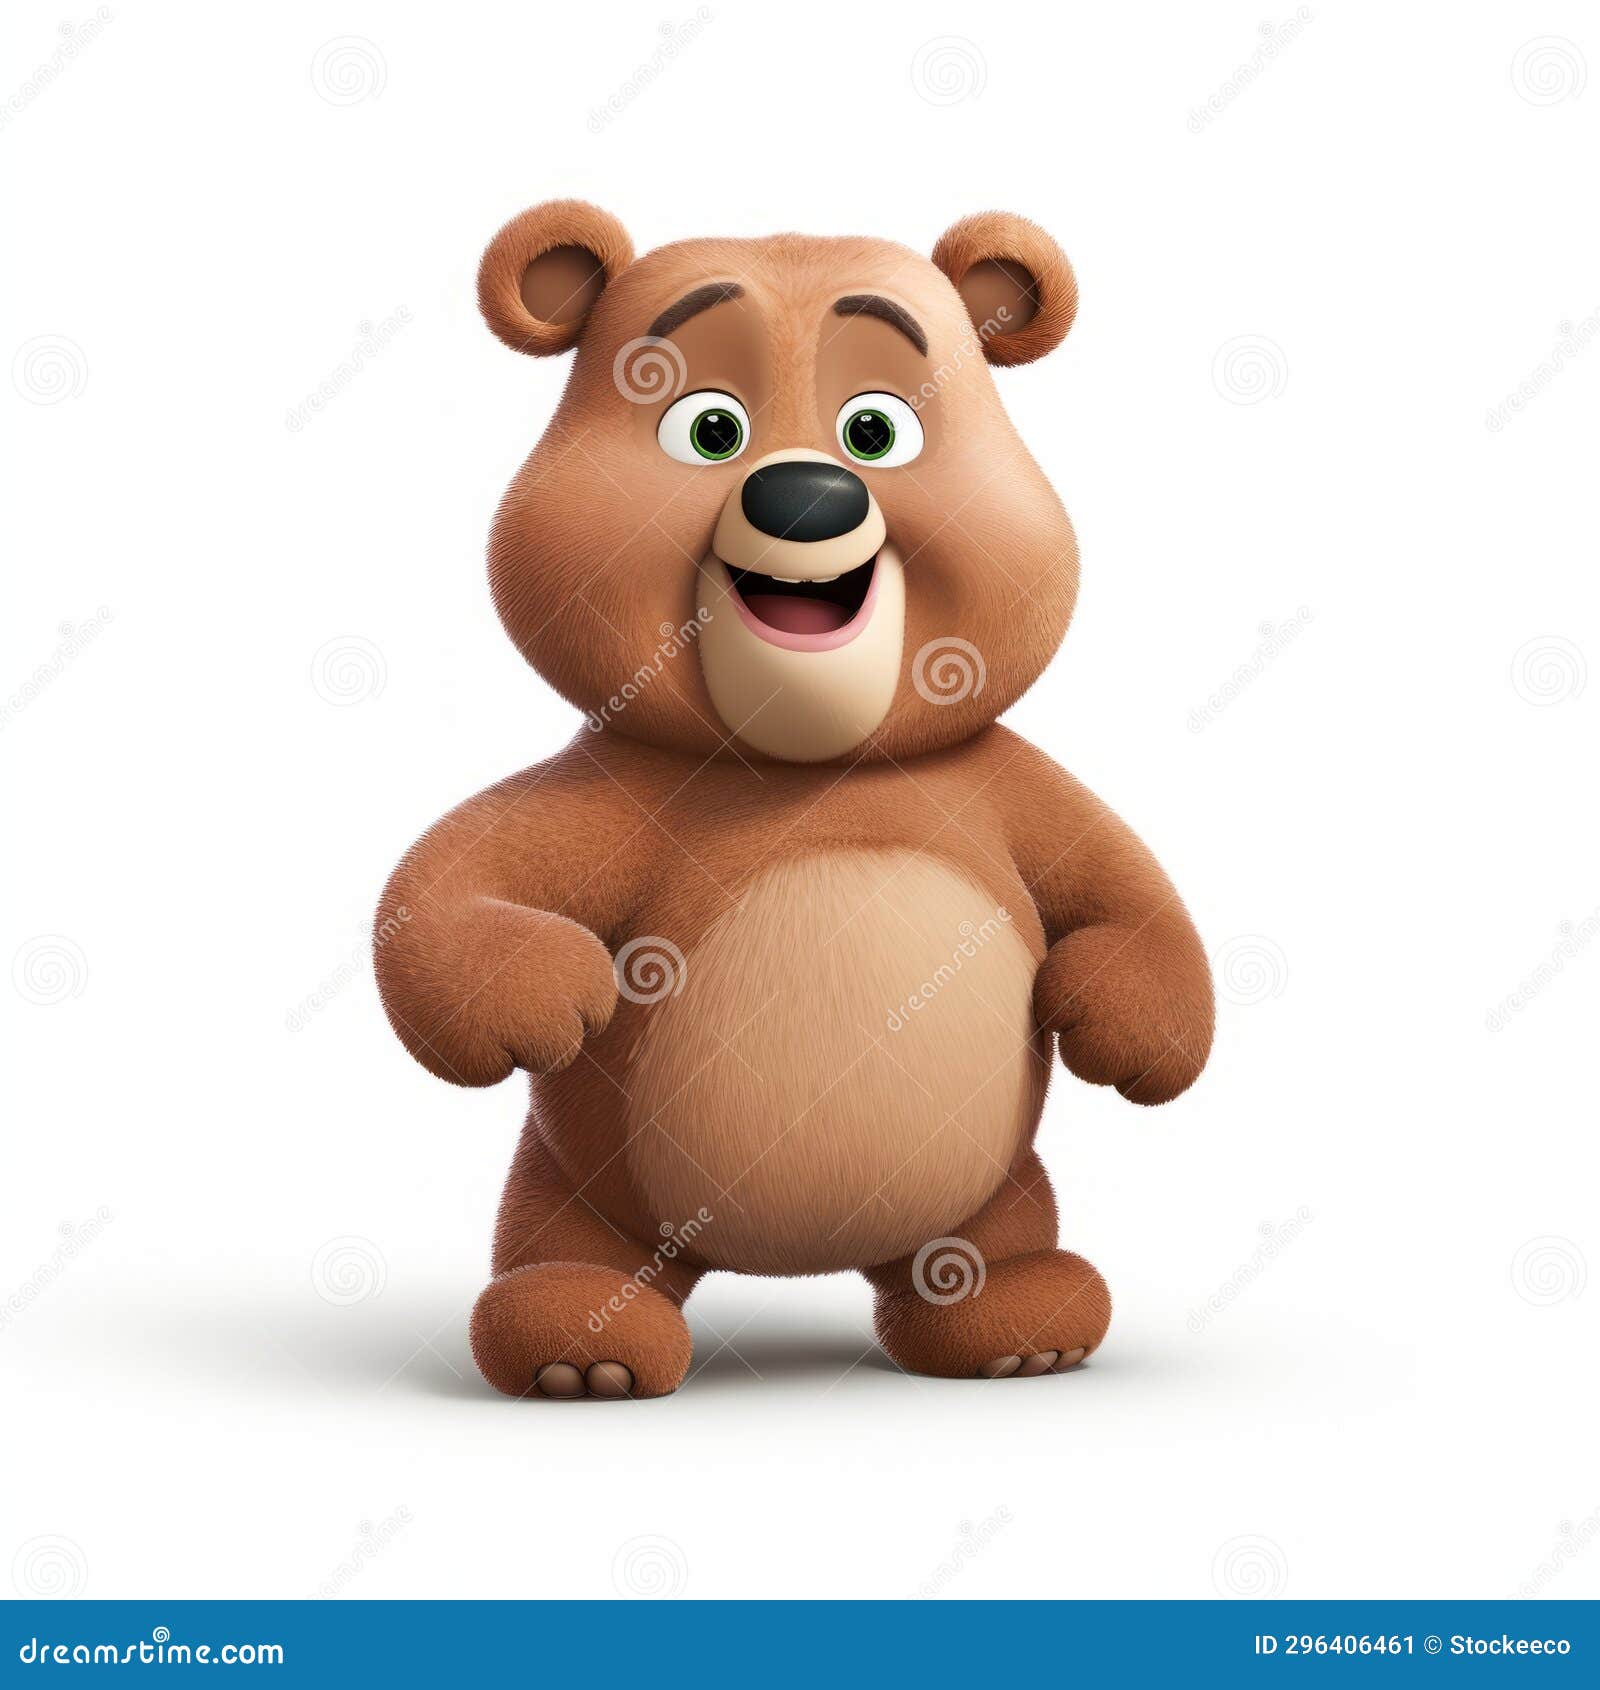 3d animated cartoon character: brown bear in forest